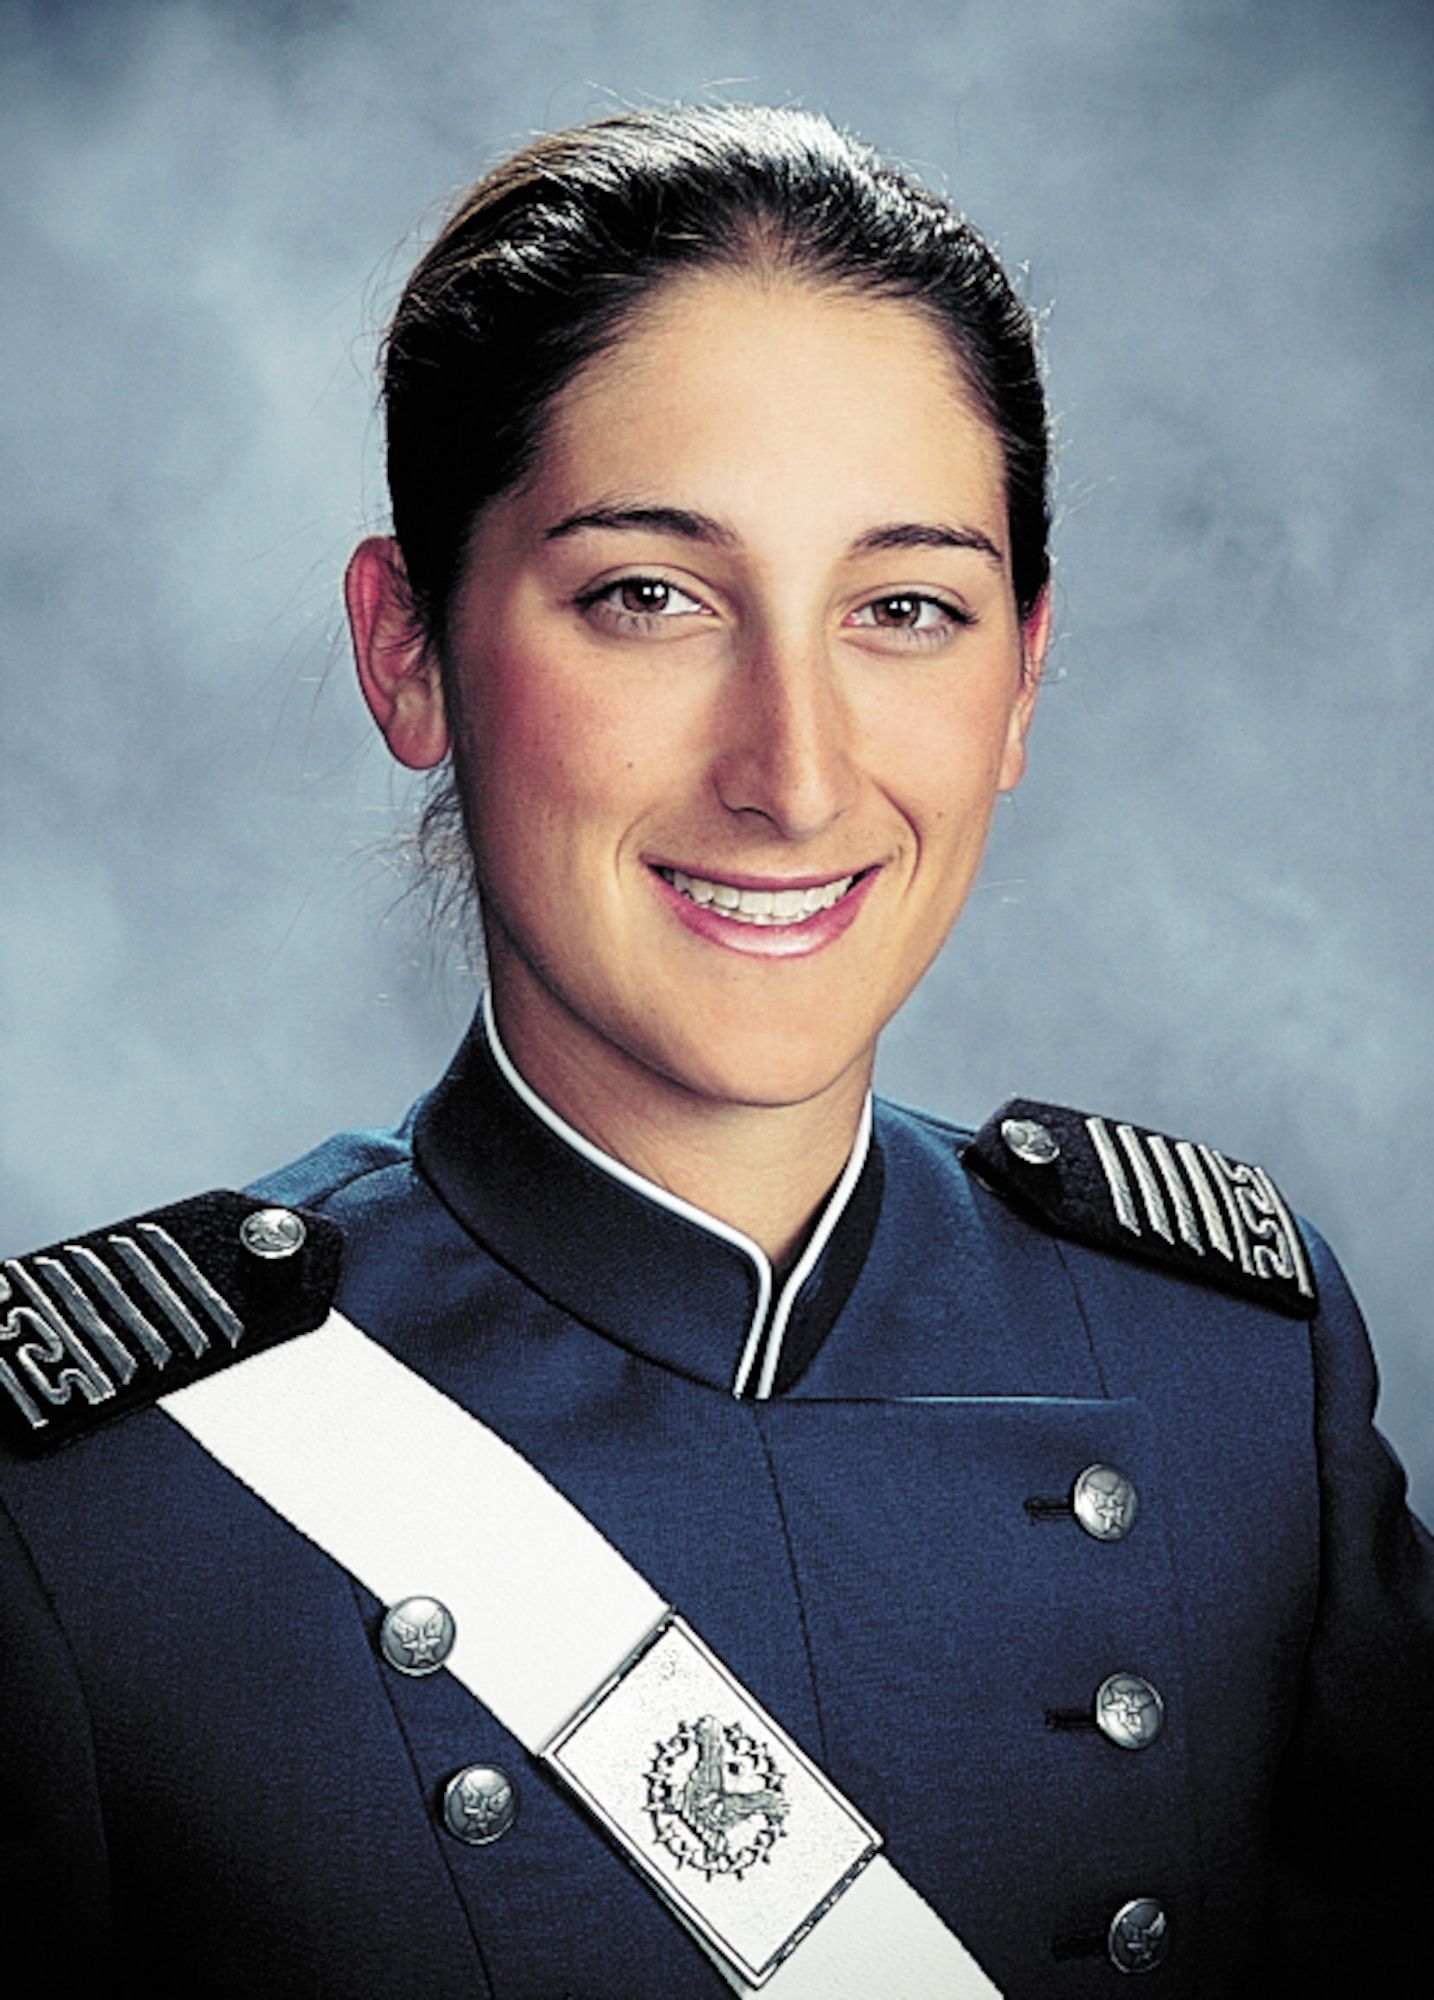 First Lt. Roslyn Schulte, 25, died from wounds suffered from a roadside bomb in Afghanistan May 20. She was a 2006 graduate of the U.S. Air Force Academy in Colorado Springs, Colo., and is seen here in her senior class photo. (U.S. Air Force photo)